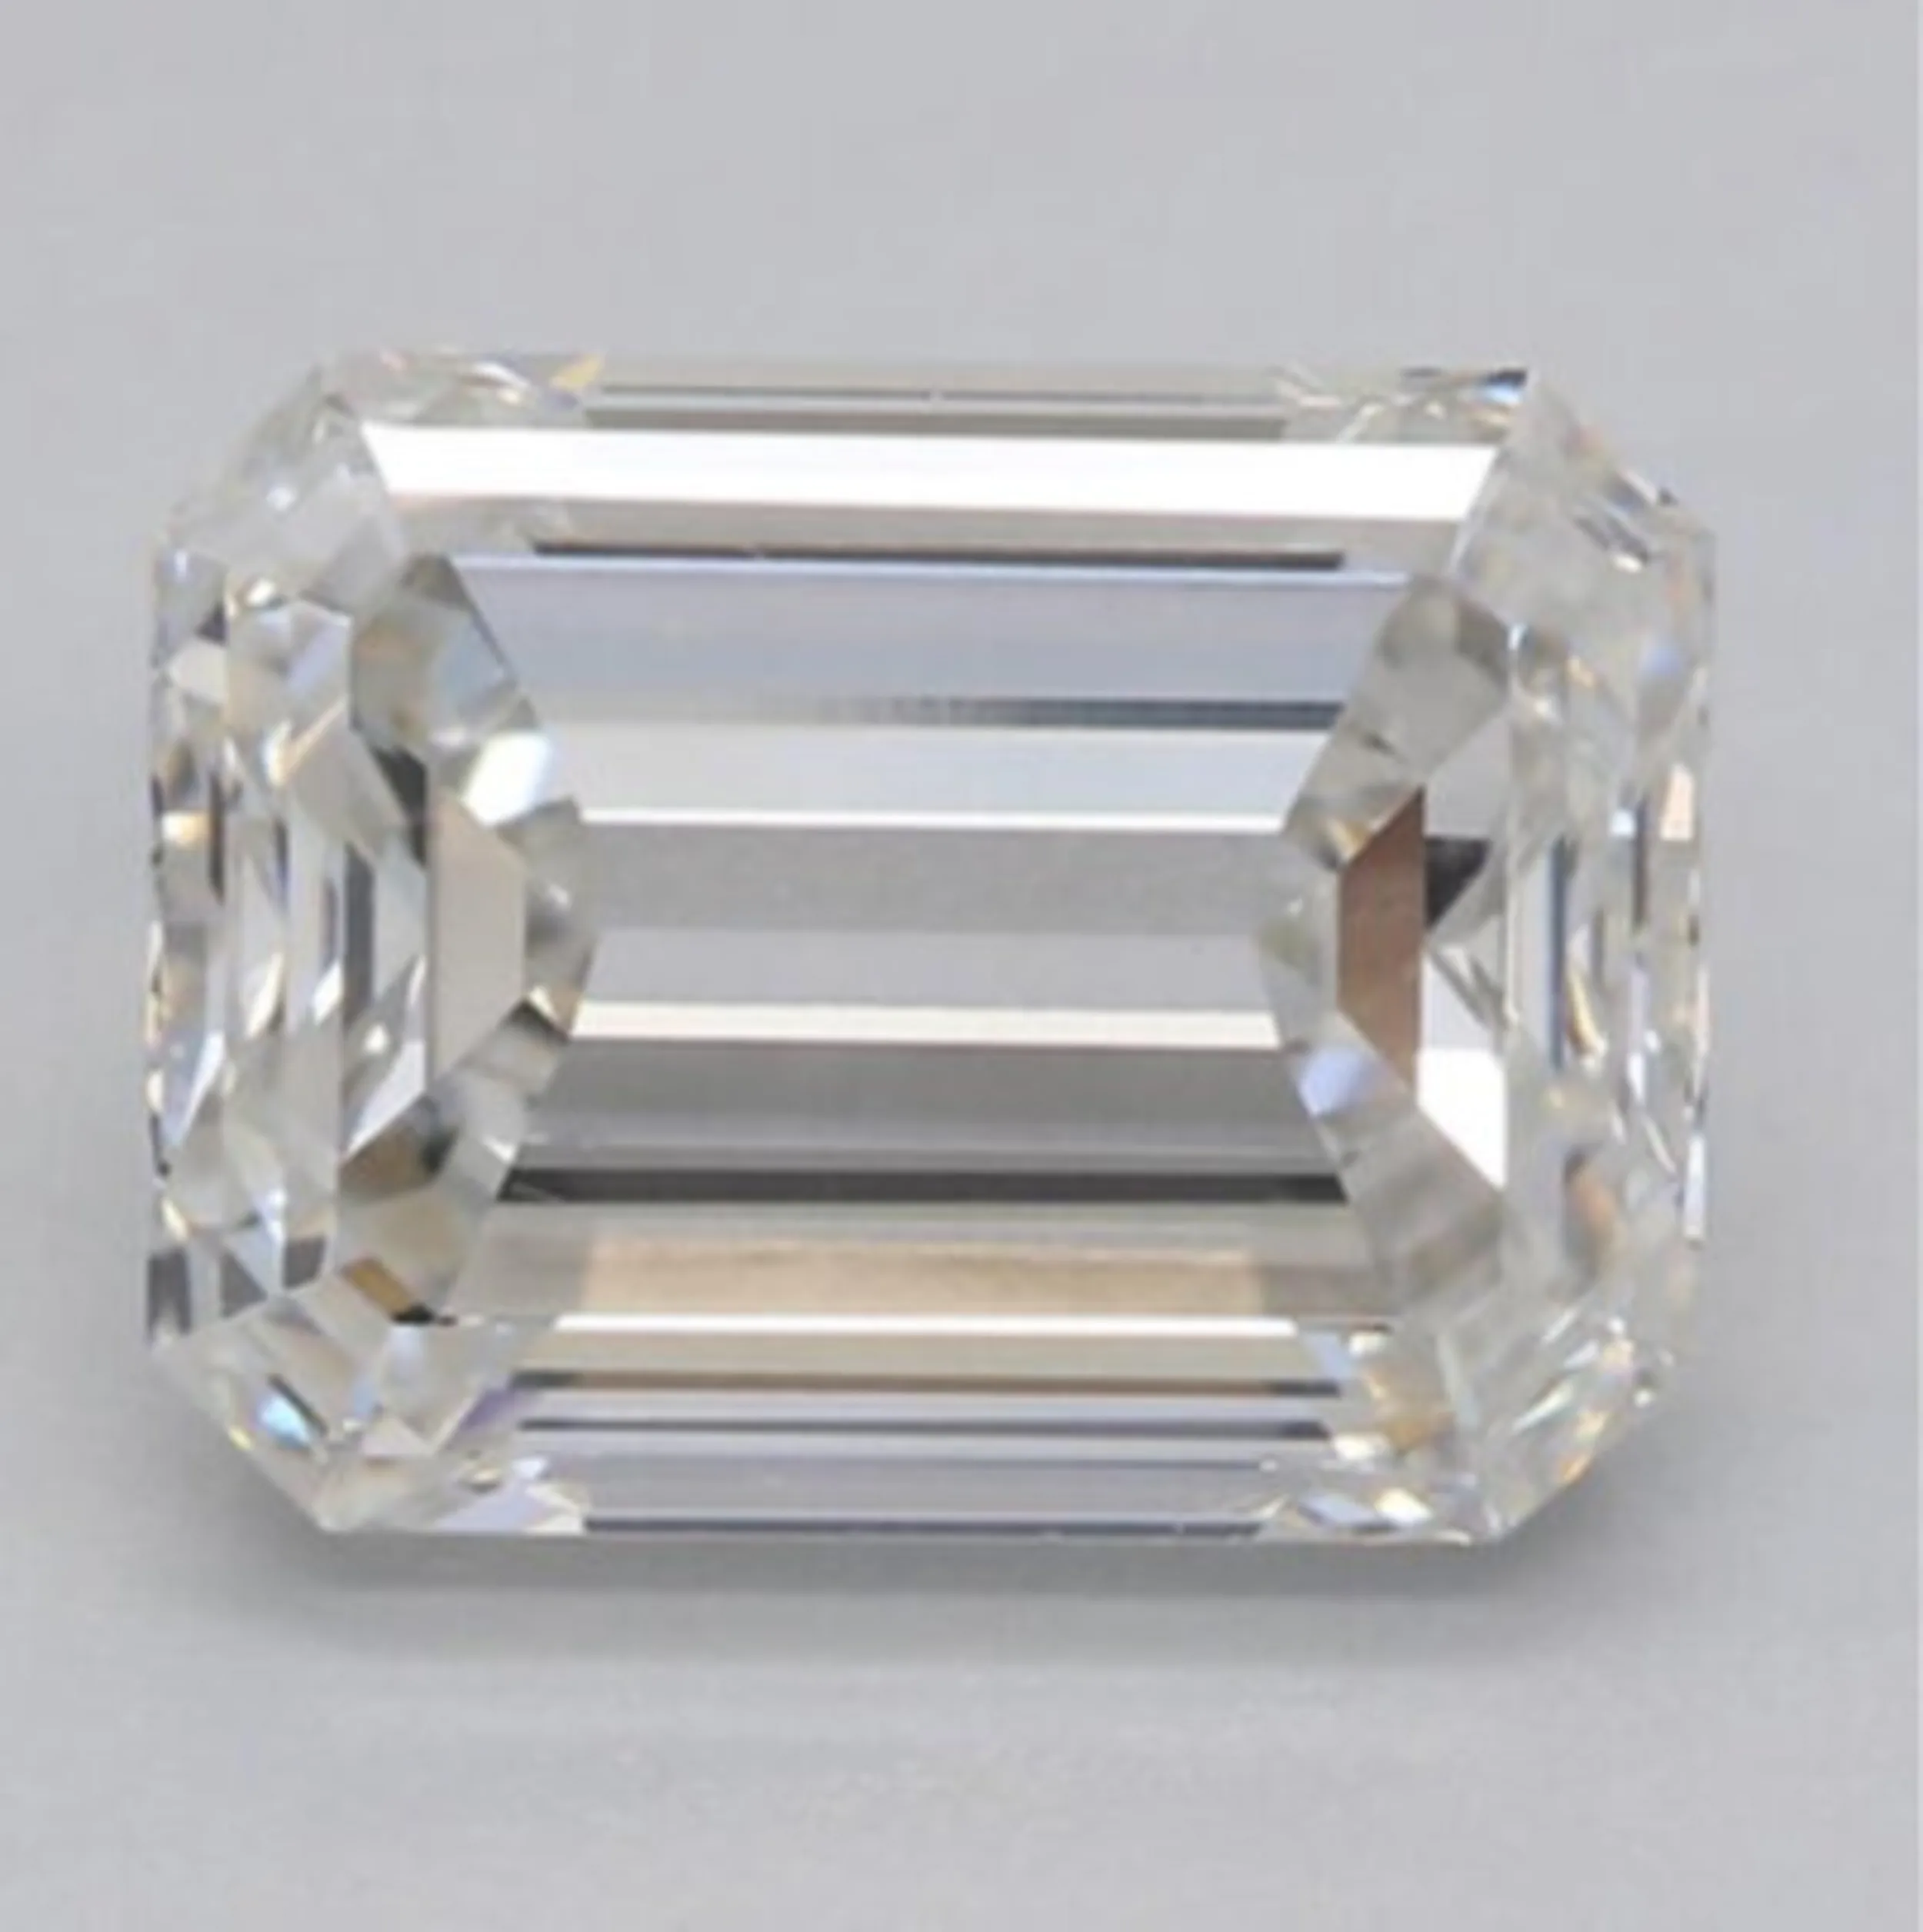 A CVD grown emerald cut without blue nuance. This diamond received an H color grading from IGI.